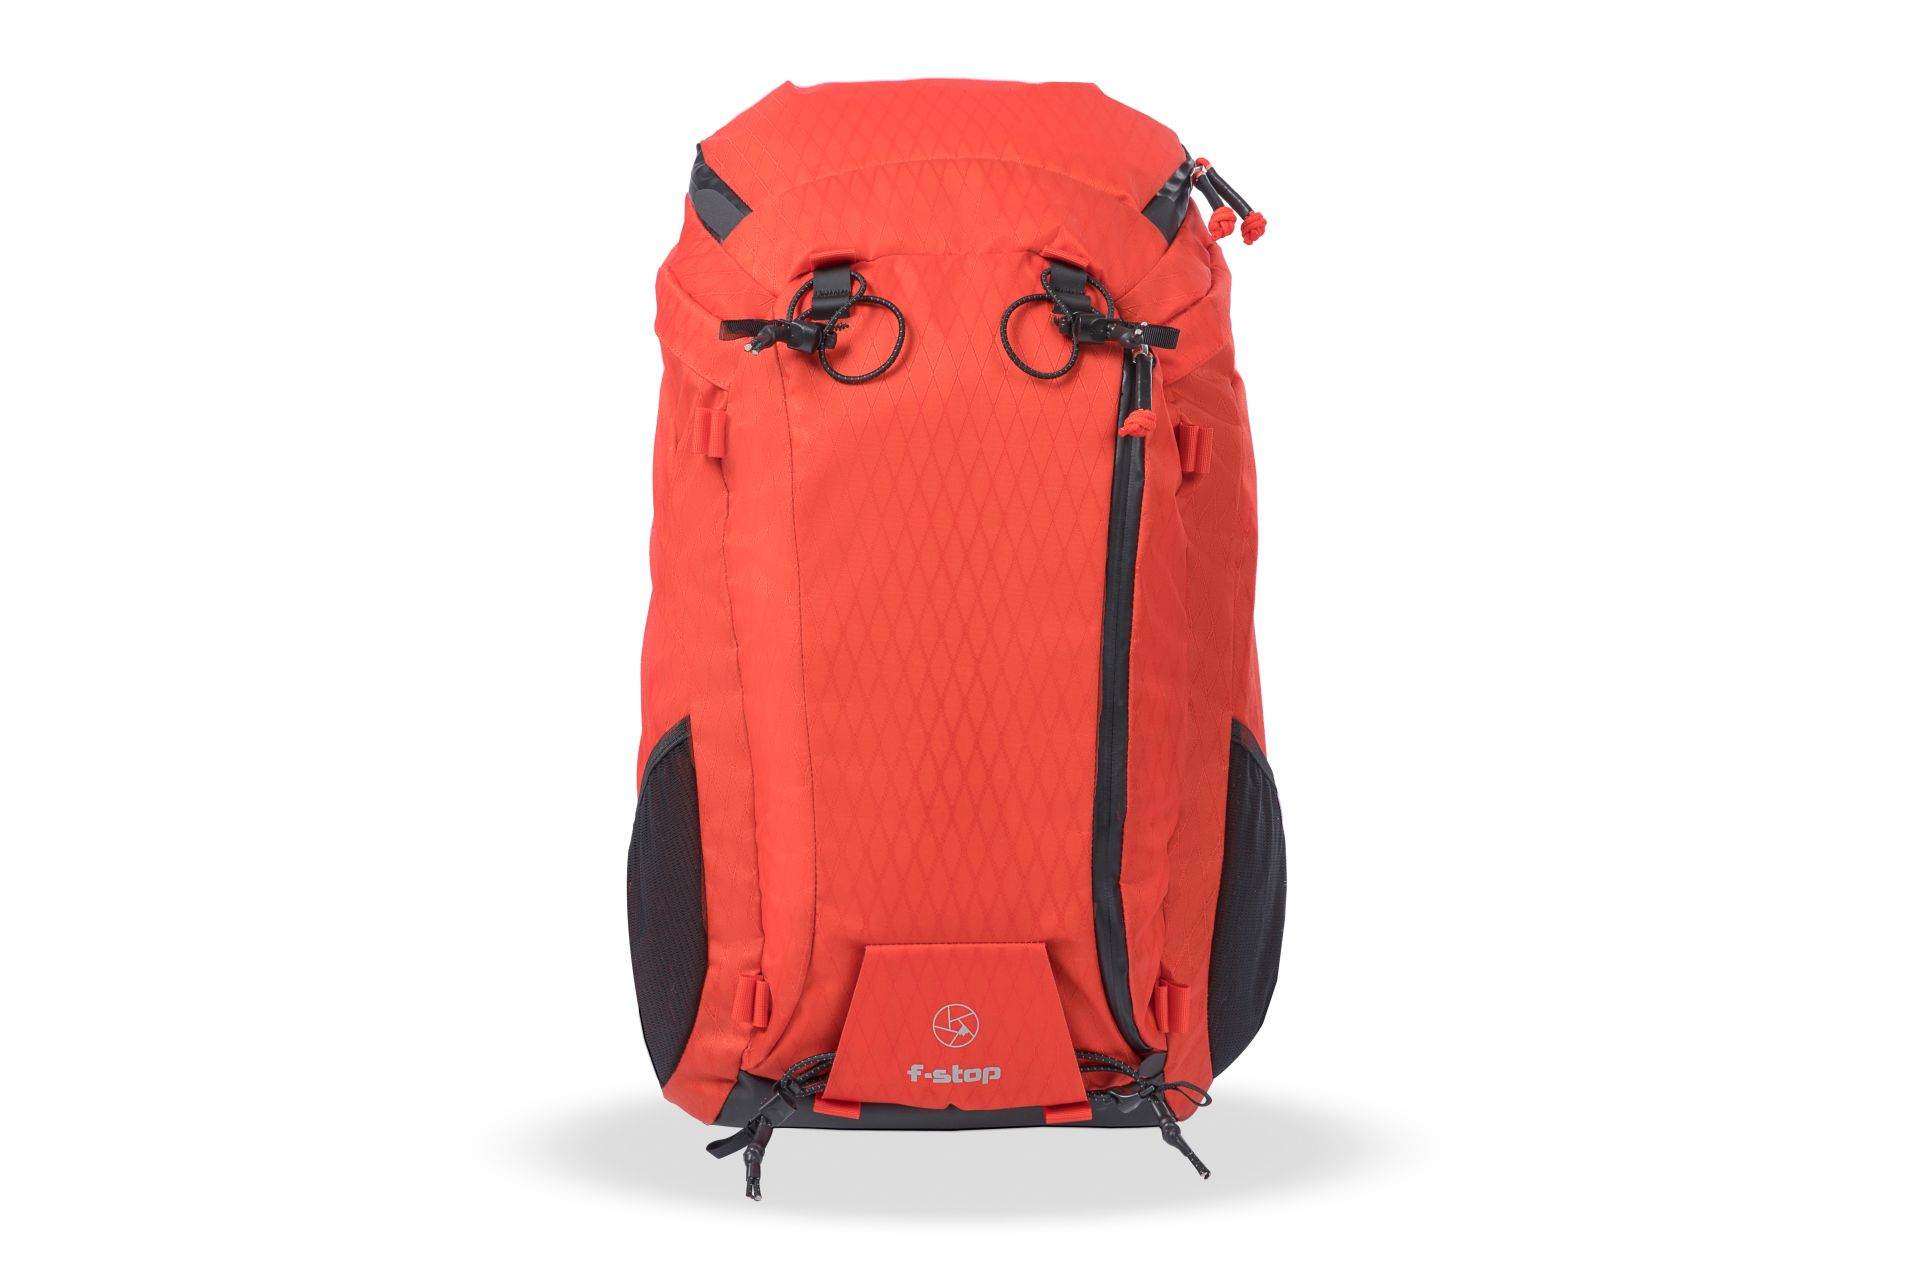 f-stop AJNA 37 liter DuraDiadiamond® camera backpack in the Magma Red color option as viewed from the front